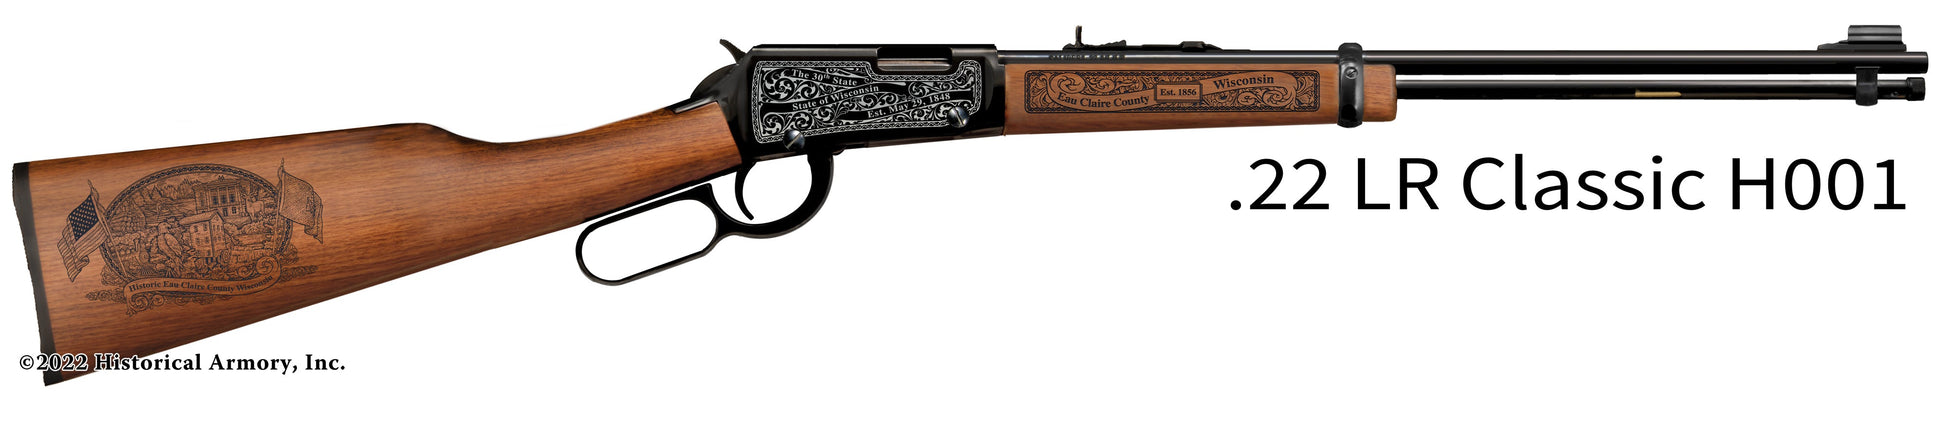 Eau Claire County Wisconsin Engraved Henry H001 Rifle